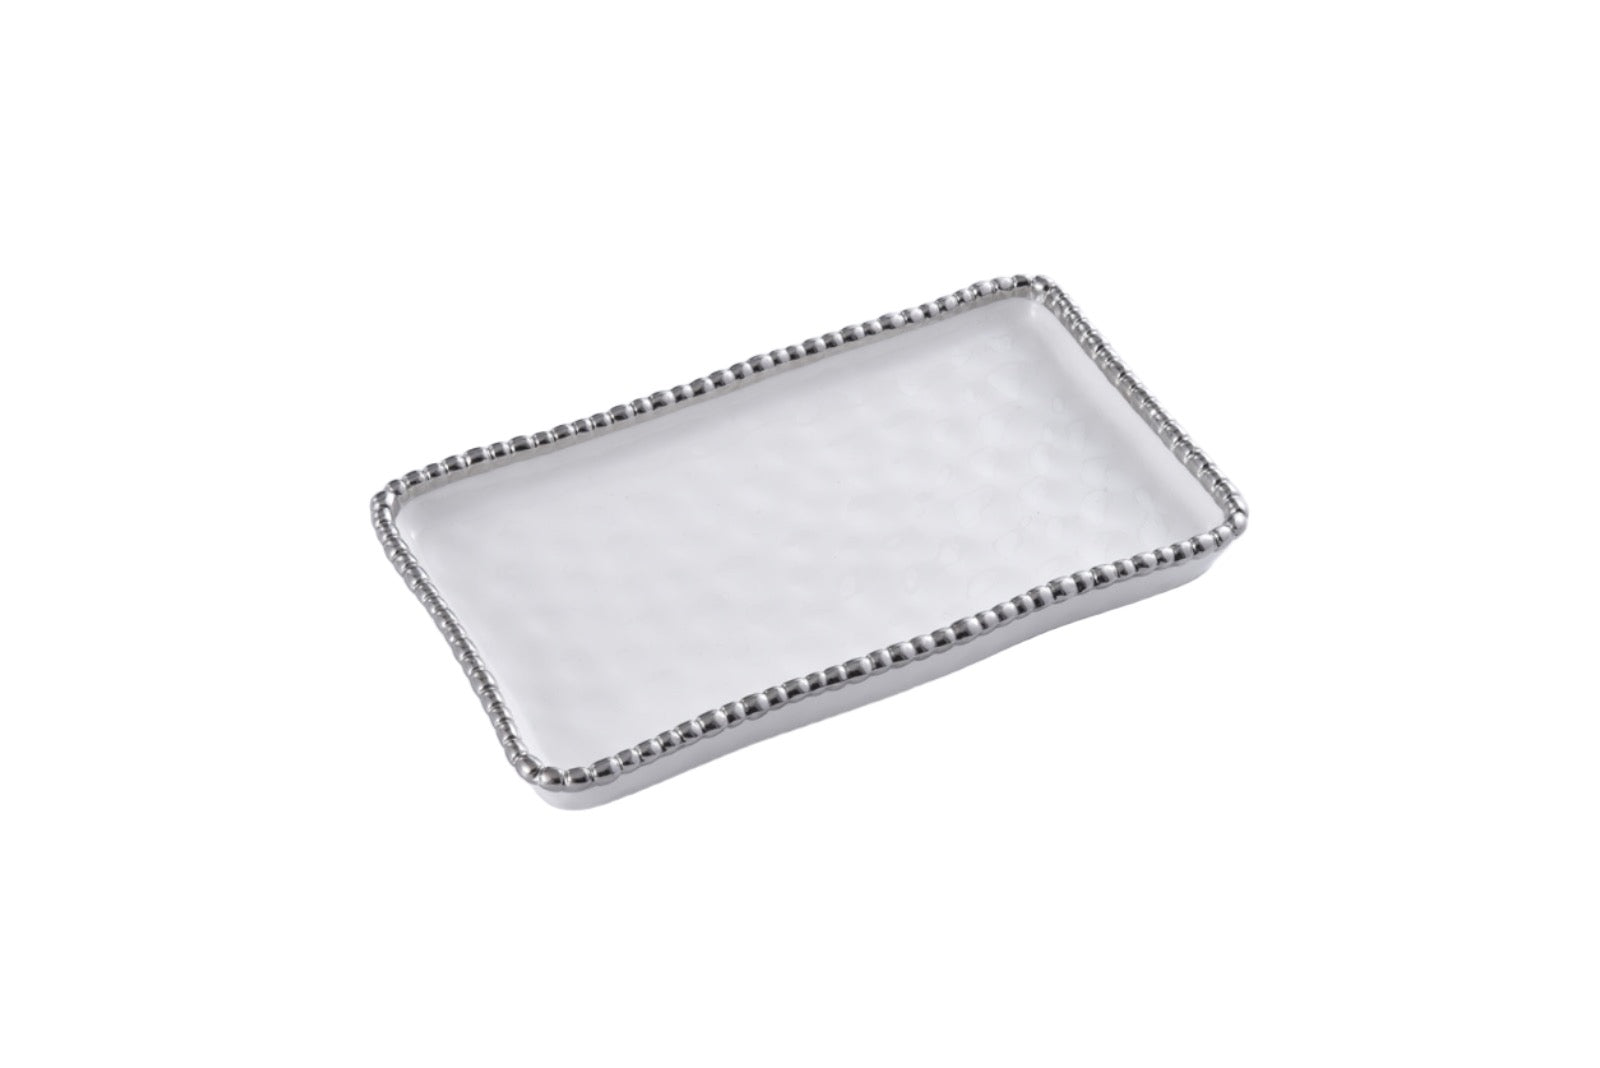 Pampa Bay Rectangular Vanity Tray With Silver Beads